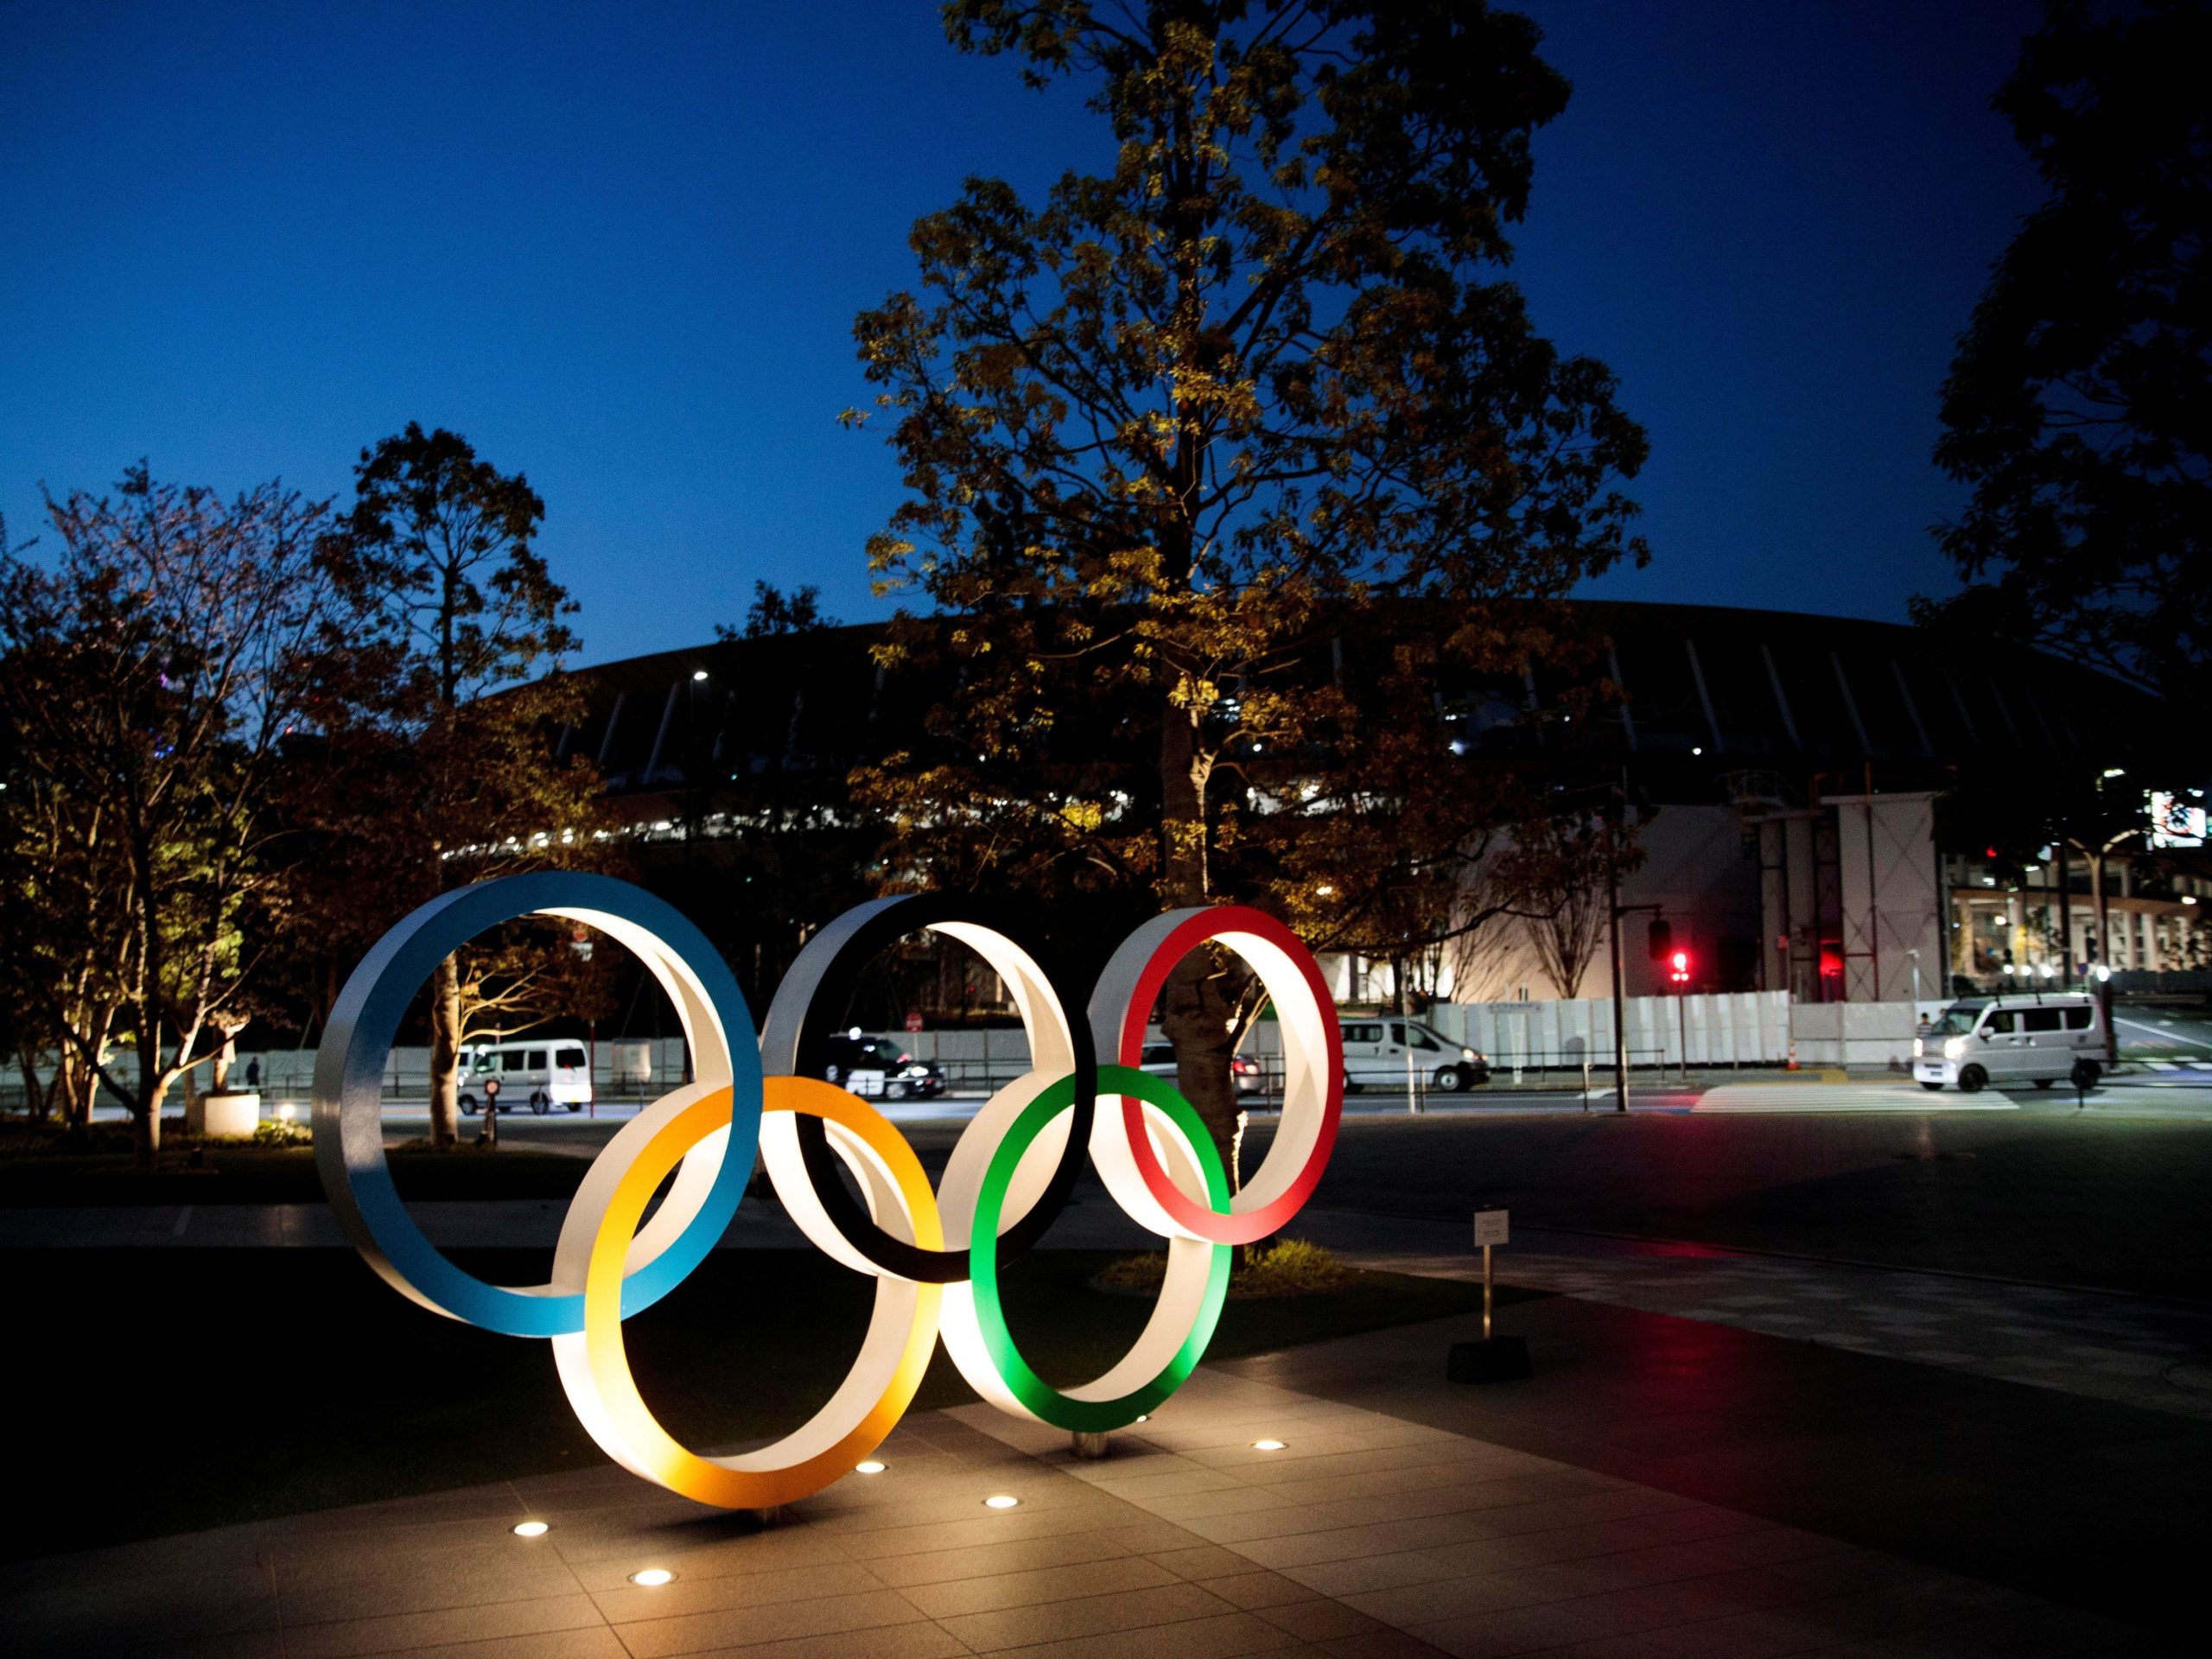 The Olympic rings displayed outside the National Stadium